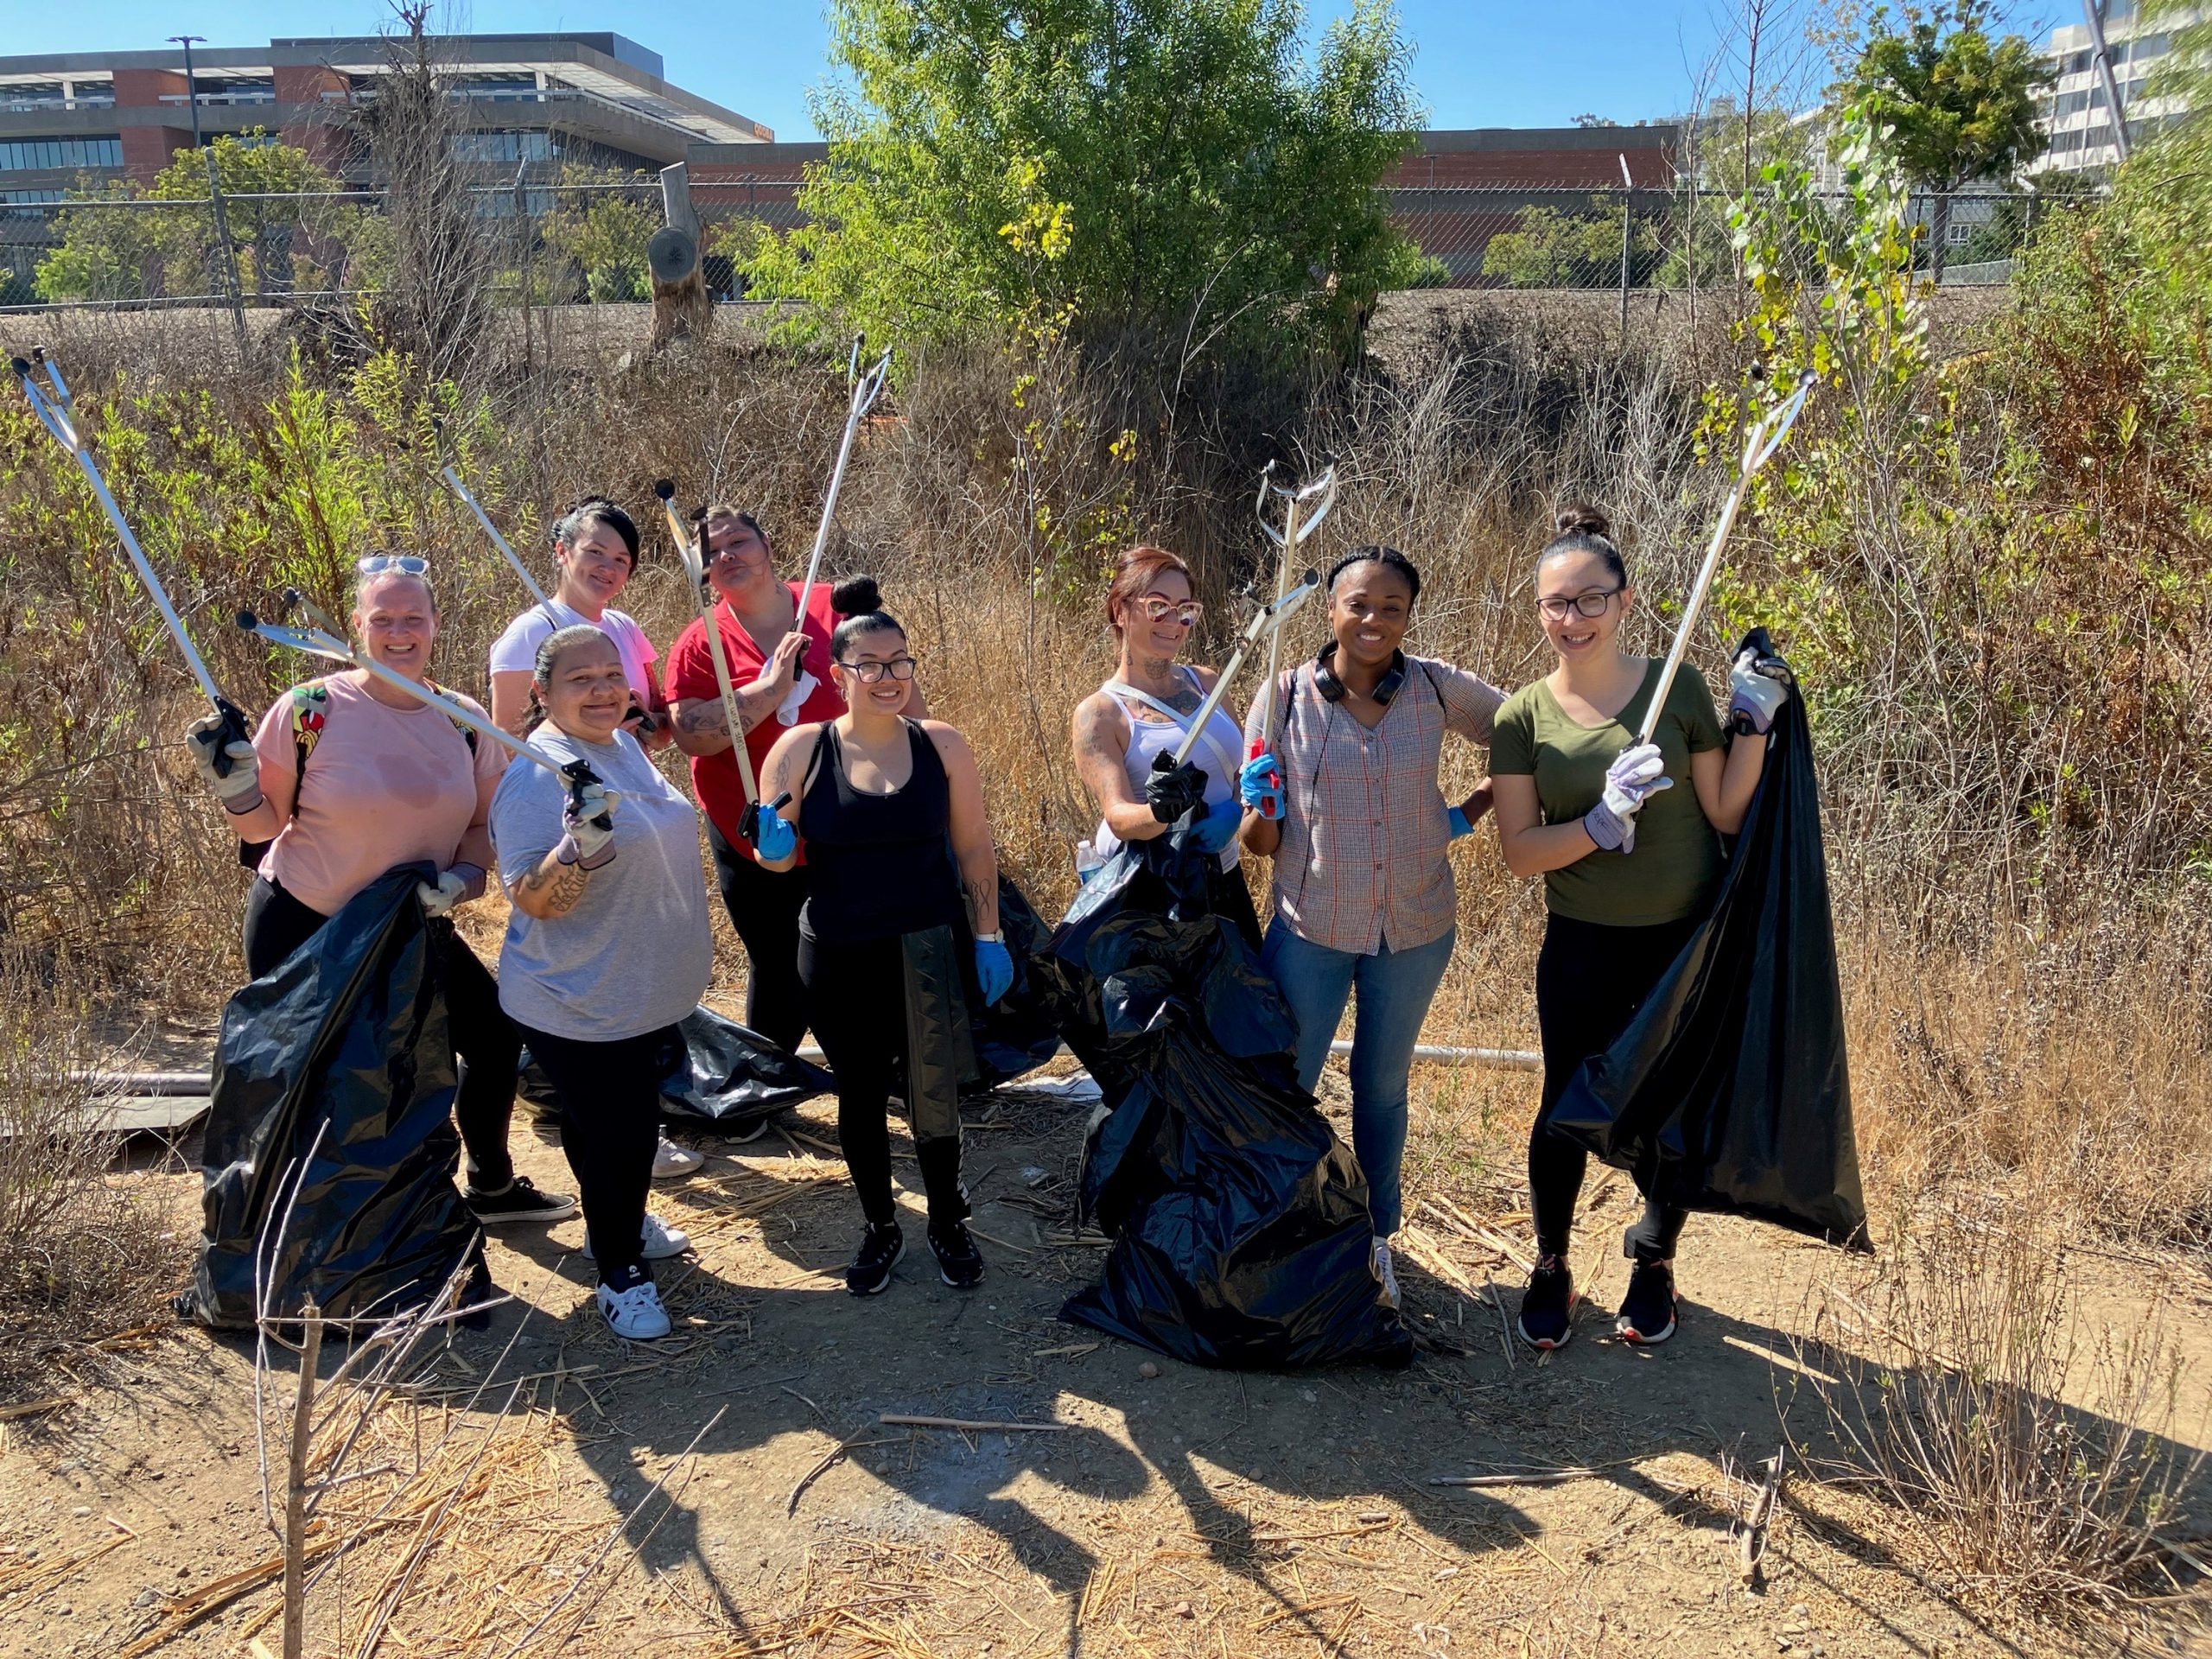 Re-entry program participants hold trash bags at San Diego River Basin.